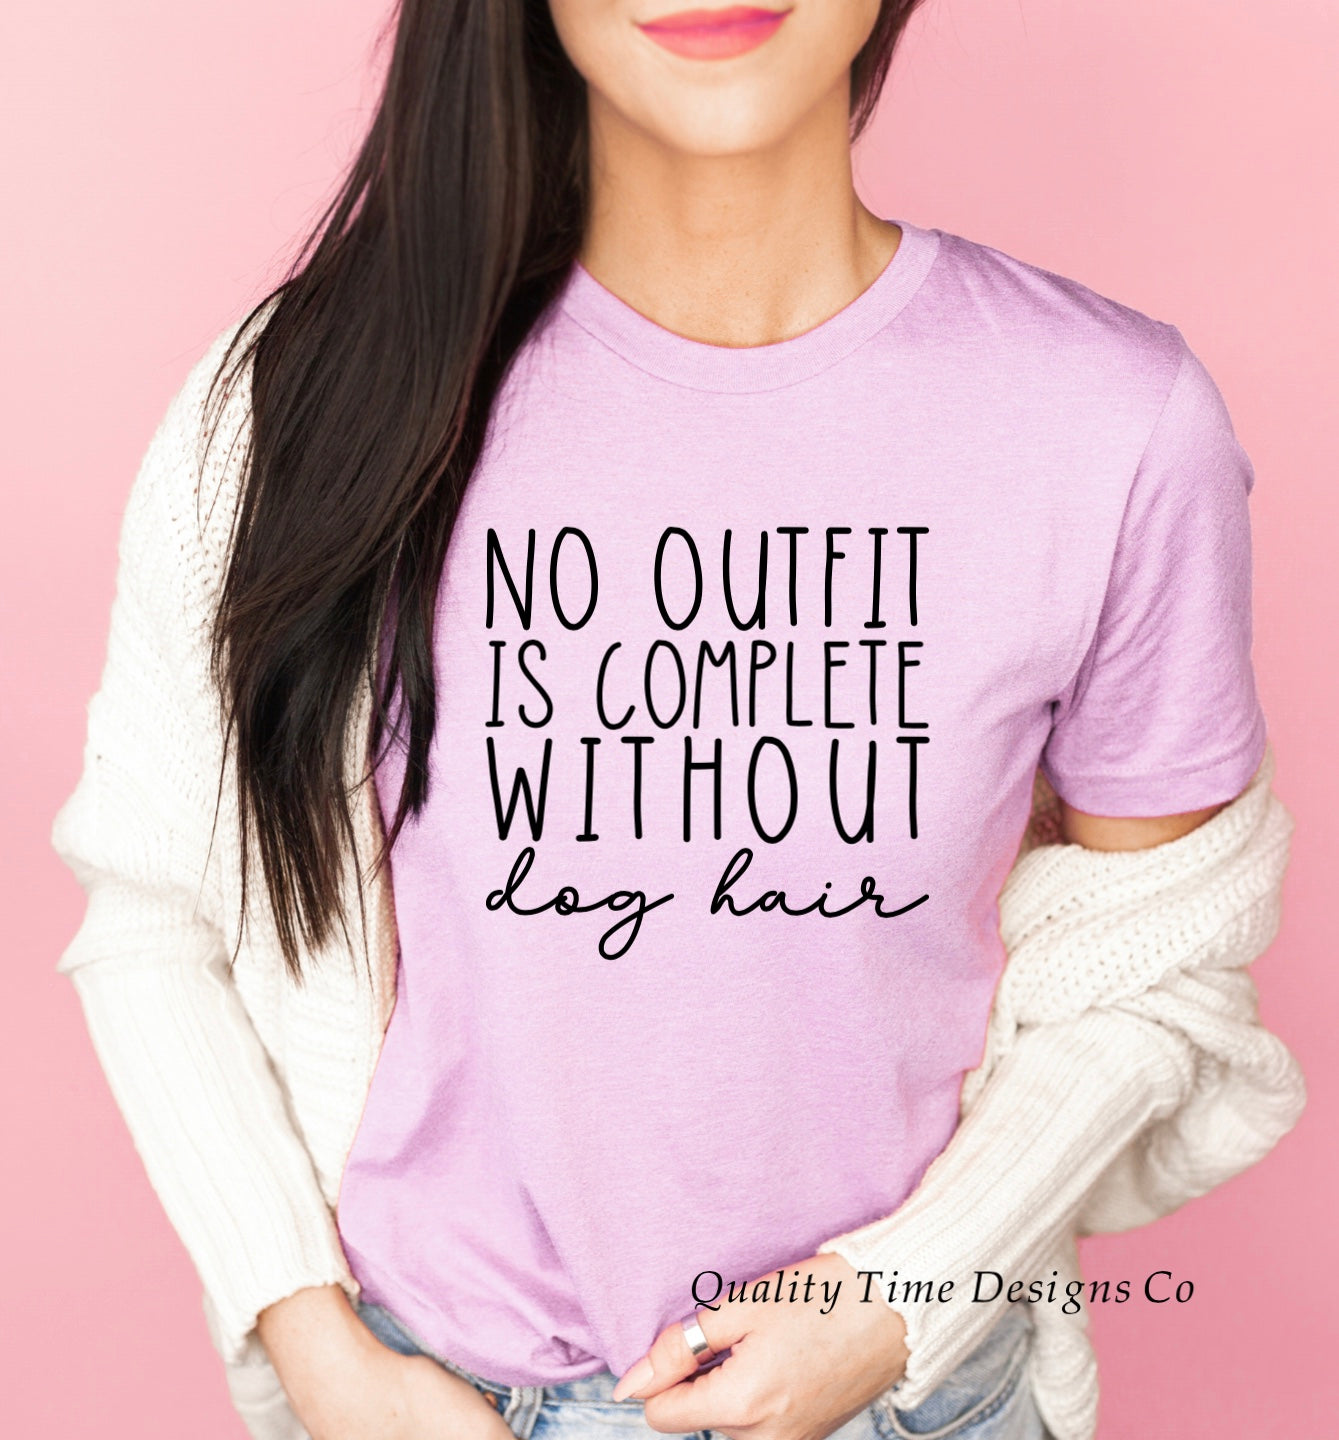 No outfit is complete without dog hair t-shirt 